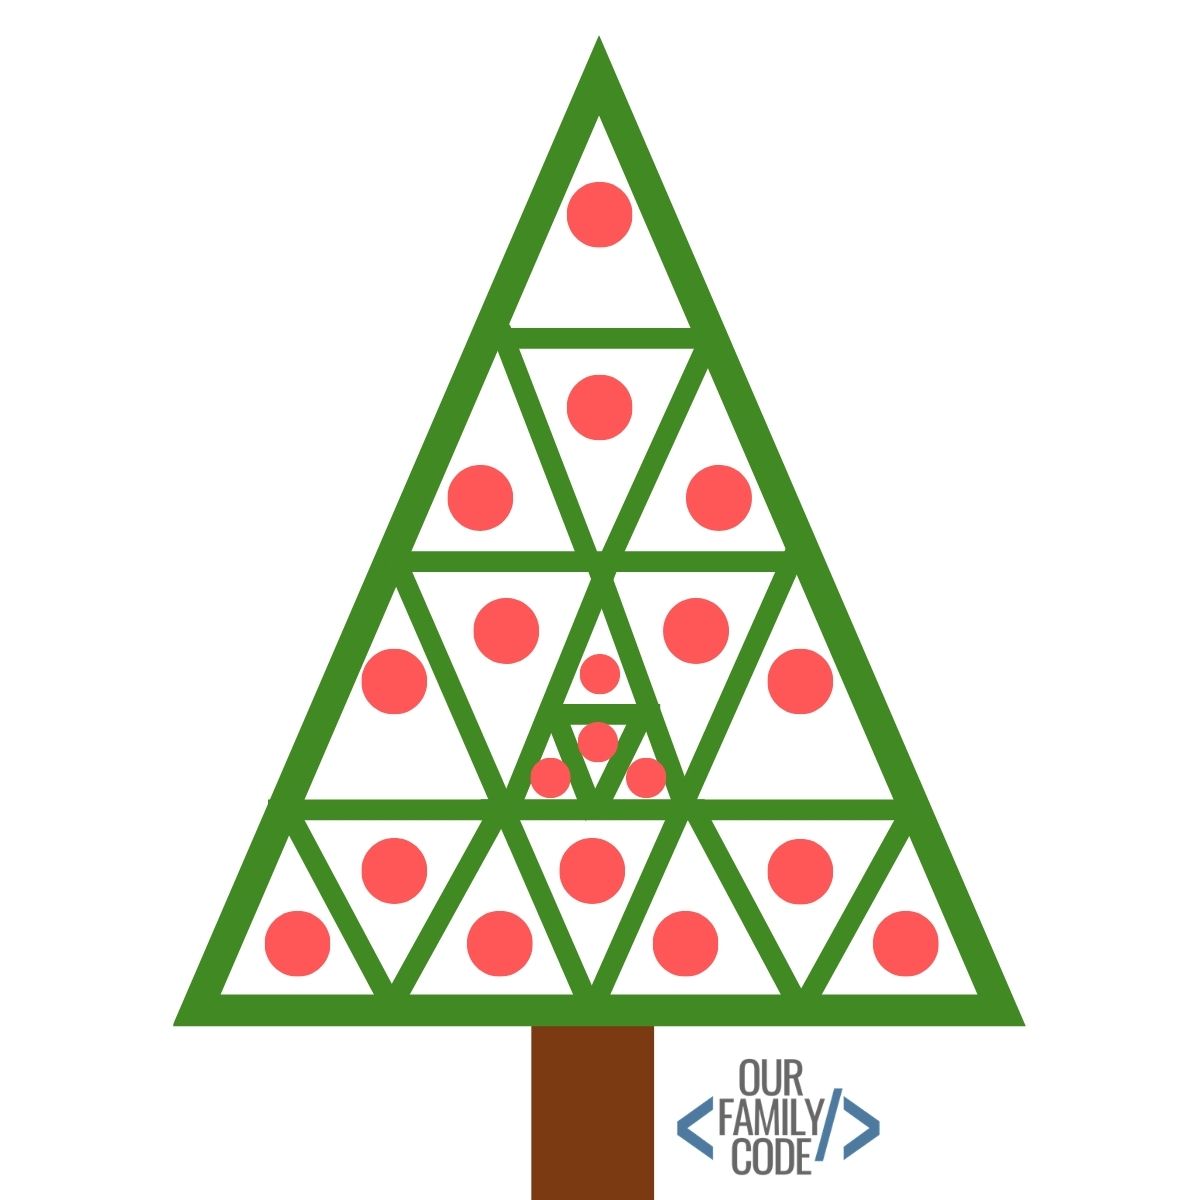 This Christmas tree algorithm art activity is an unplugged coding activity for kids K-8 to learn how everyday actions can be turned into a computer program. #HourofCode #teachkidstocode #kidcoders #STEAM #STEM #codingforkids #learntocode #Christmascrafts #Steampoweredholidays